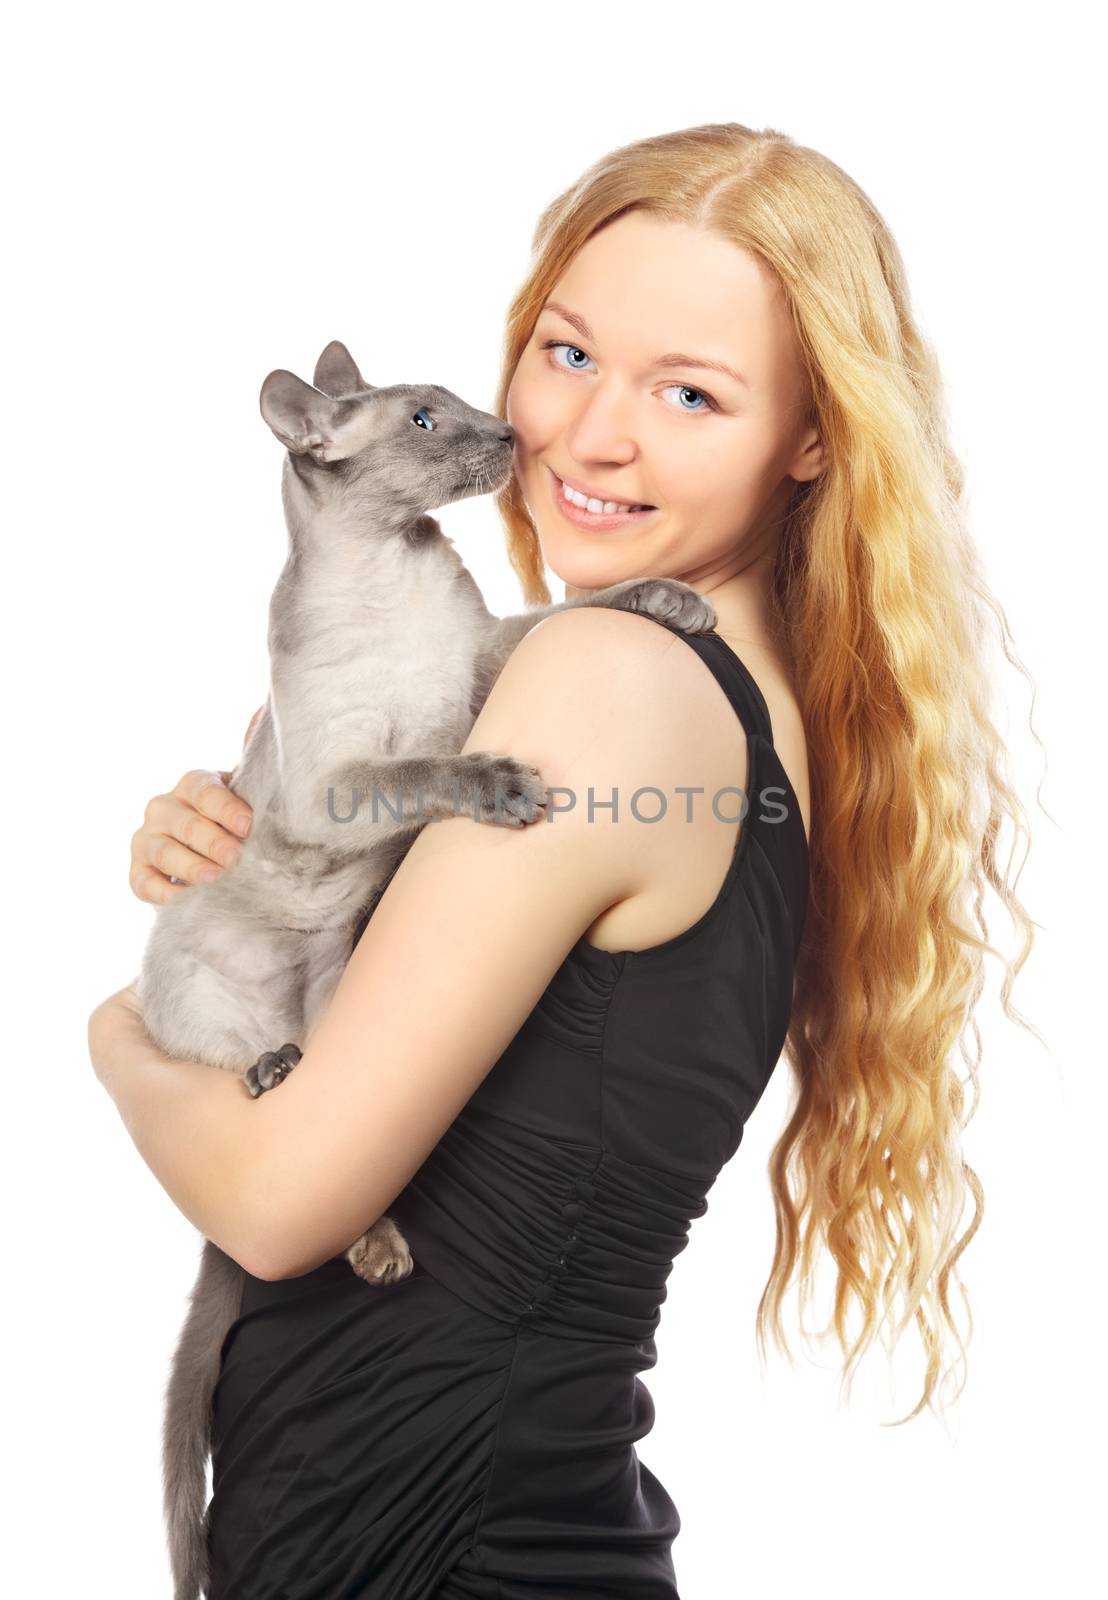 Girl With Cat by petr_malyshev